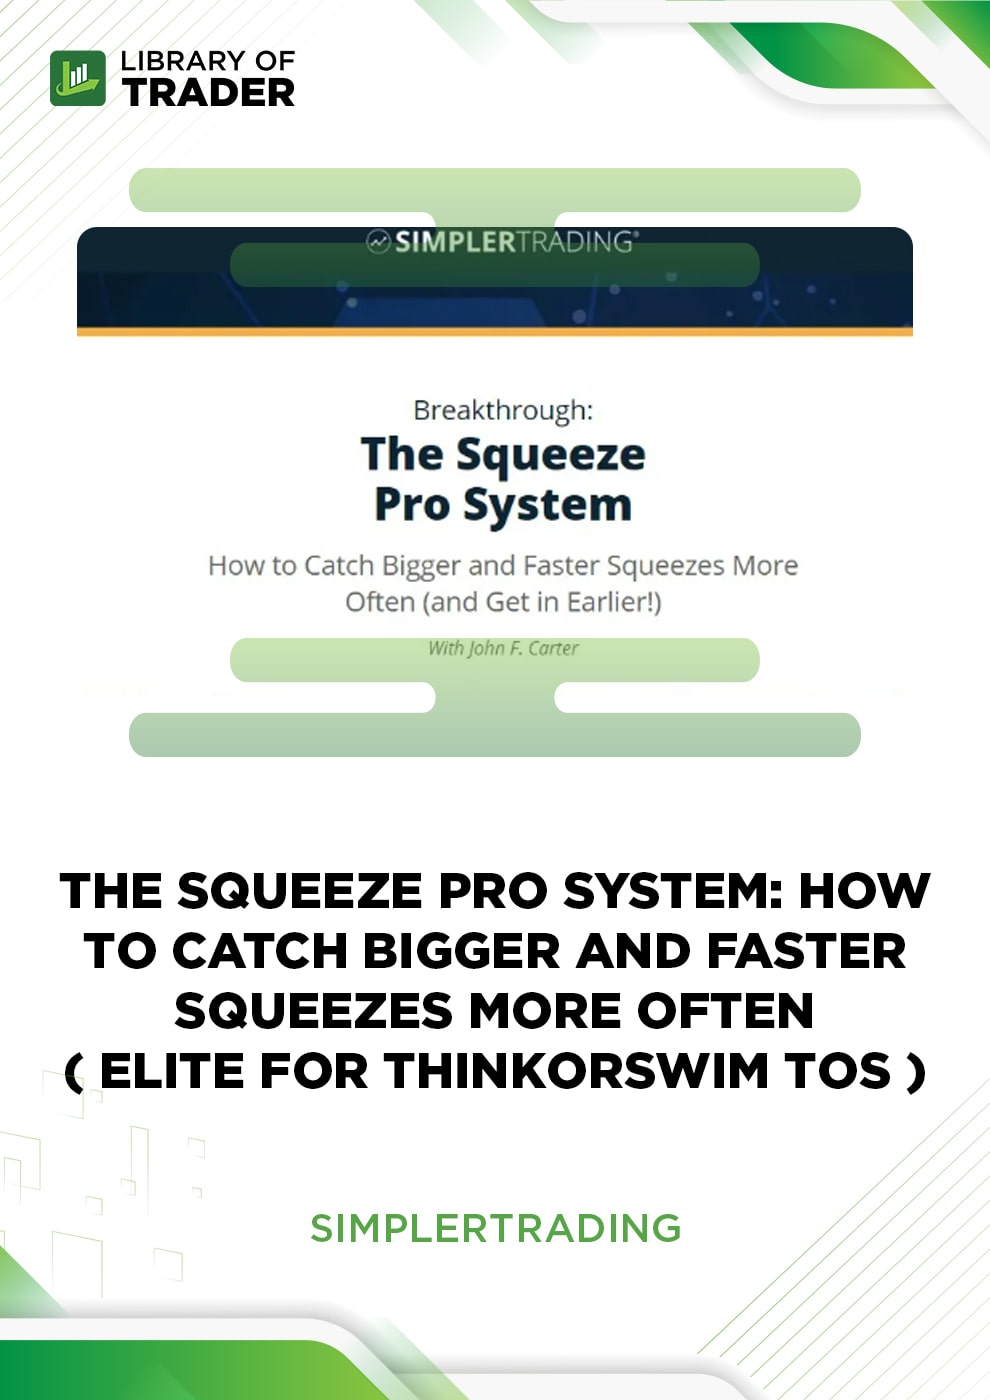 The Squeeze Pro System Elite by Simplertrading: How to Catch Bigger and Faster Squeezes